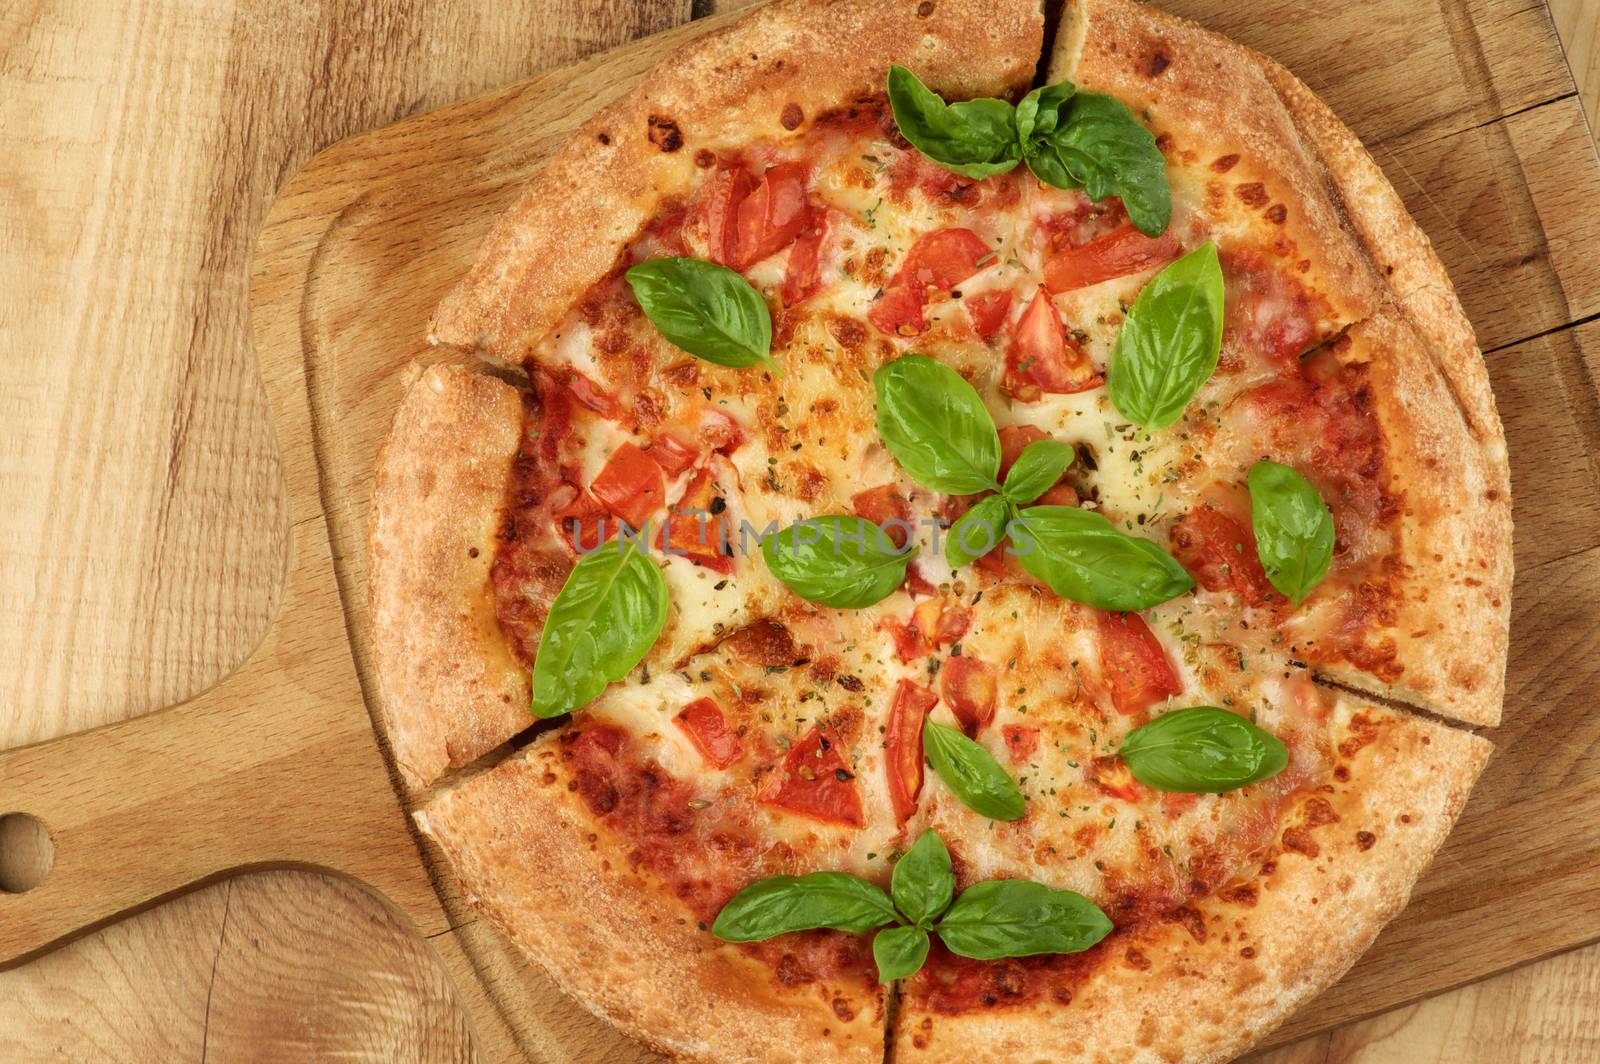 Freshly Baked Margarita Pizza with Tomatoes, Cheese and Basil Leafs on Cutting Board closeup on Wooden background